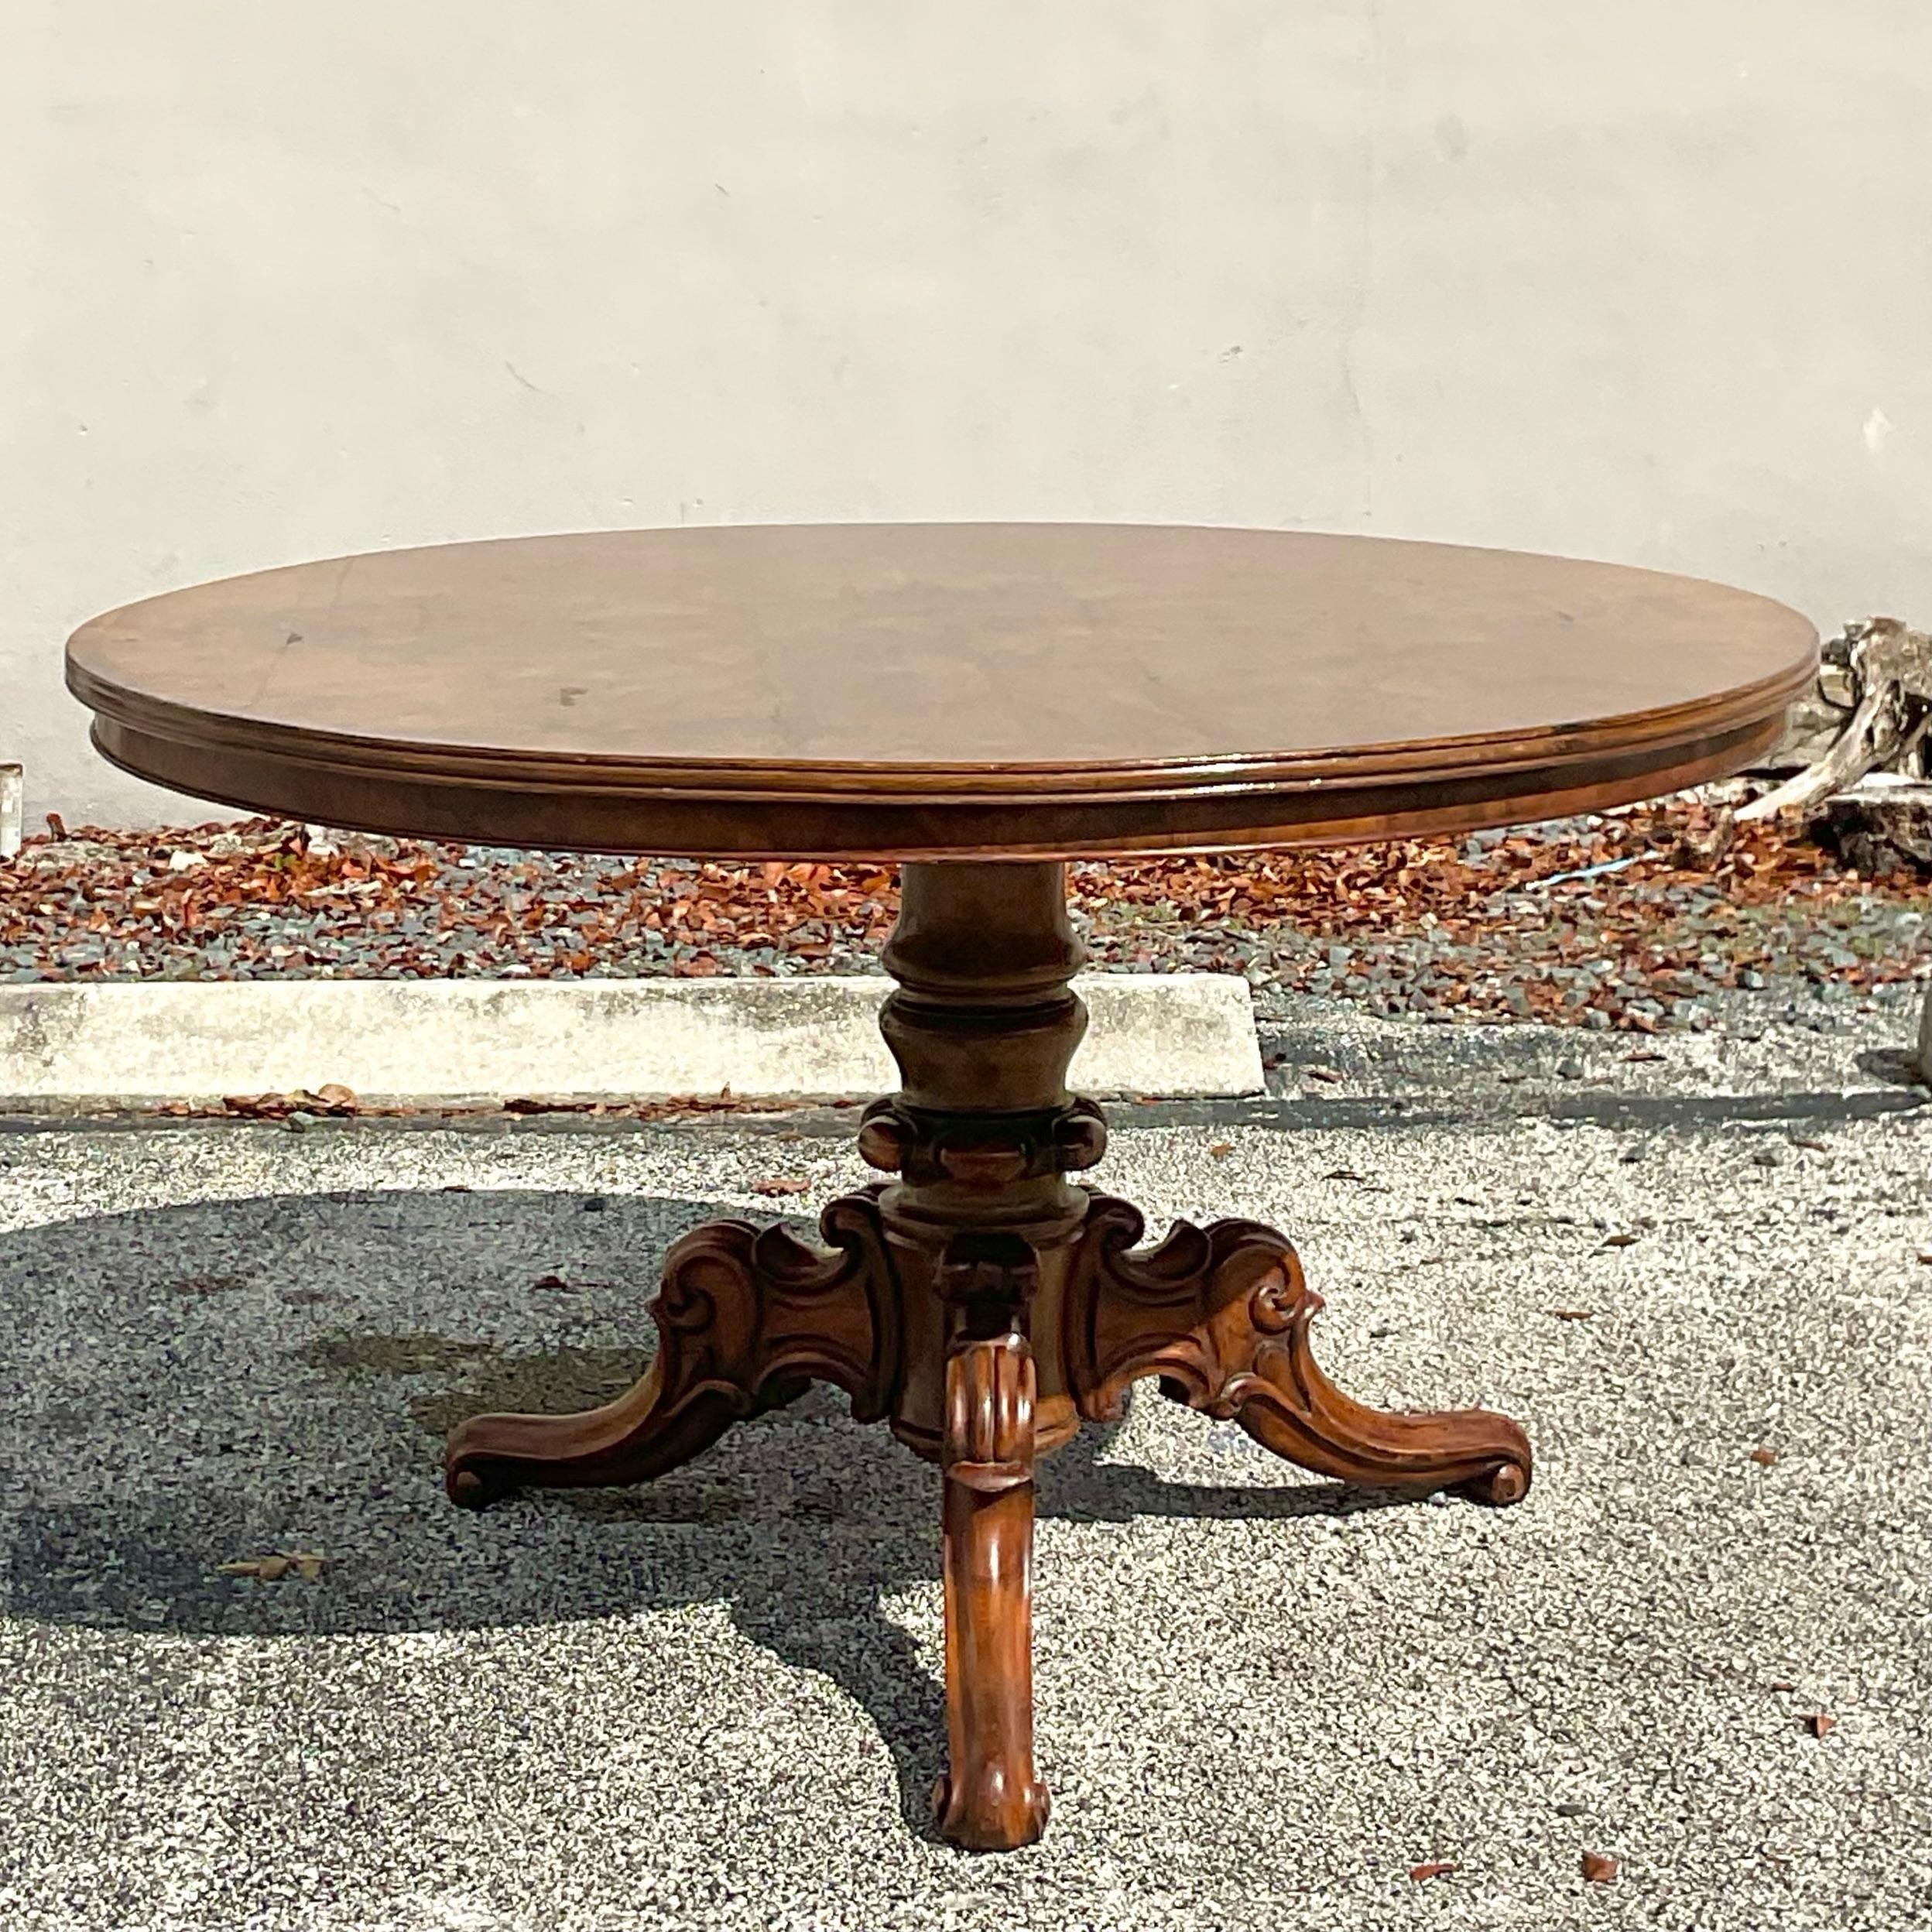 Fine quality mahogany round pedestal center or dining table. The top has gorgeous visible wood graining and the pedestal and its four legs are all intricately carved with impeccable attention to detail. Gorgeous old world addition to any space.